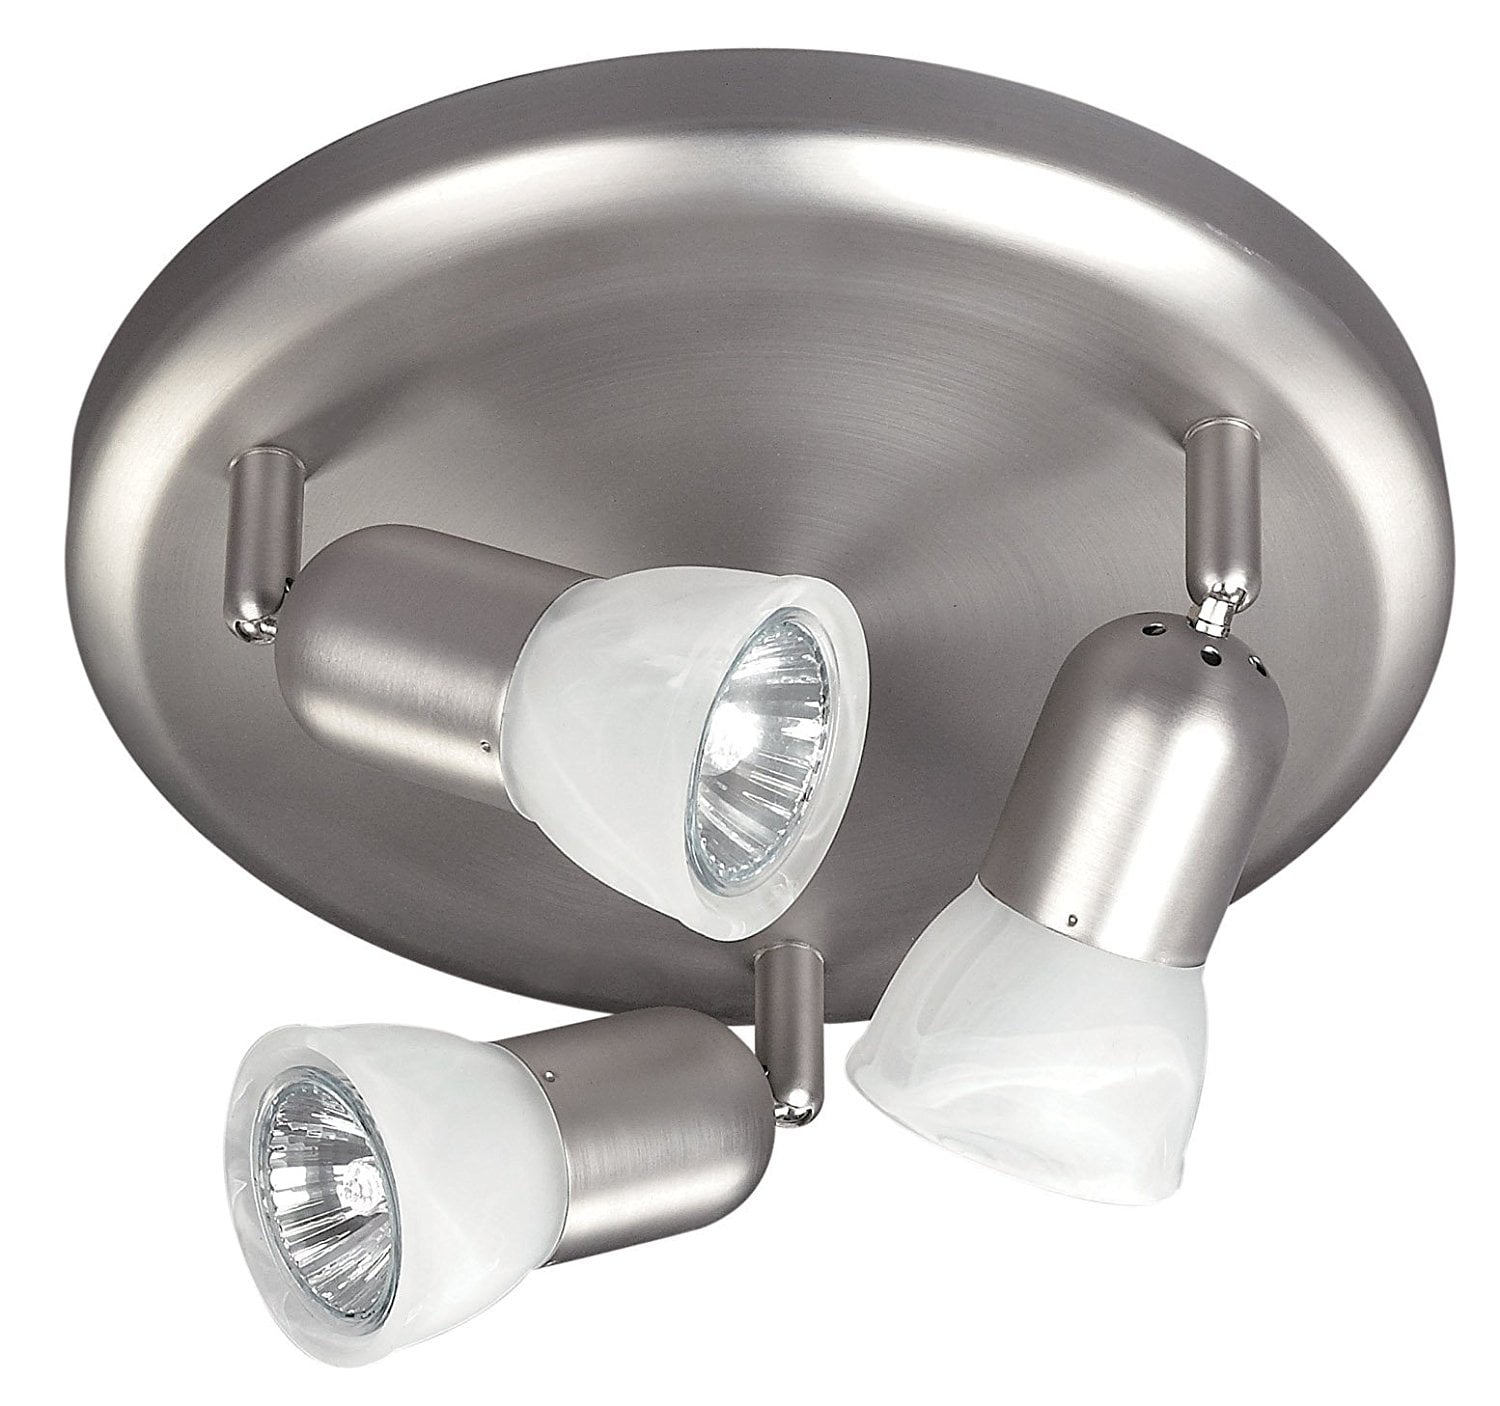 Ltd Icw356a03bpt10 James 3 Bulb Ceiling Wall Light Brushed Pewter By Canarm Ship From Us Walmart Com